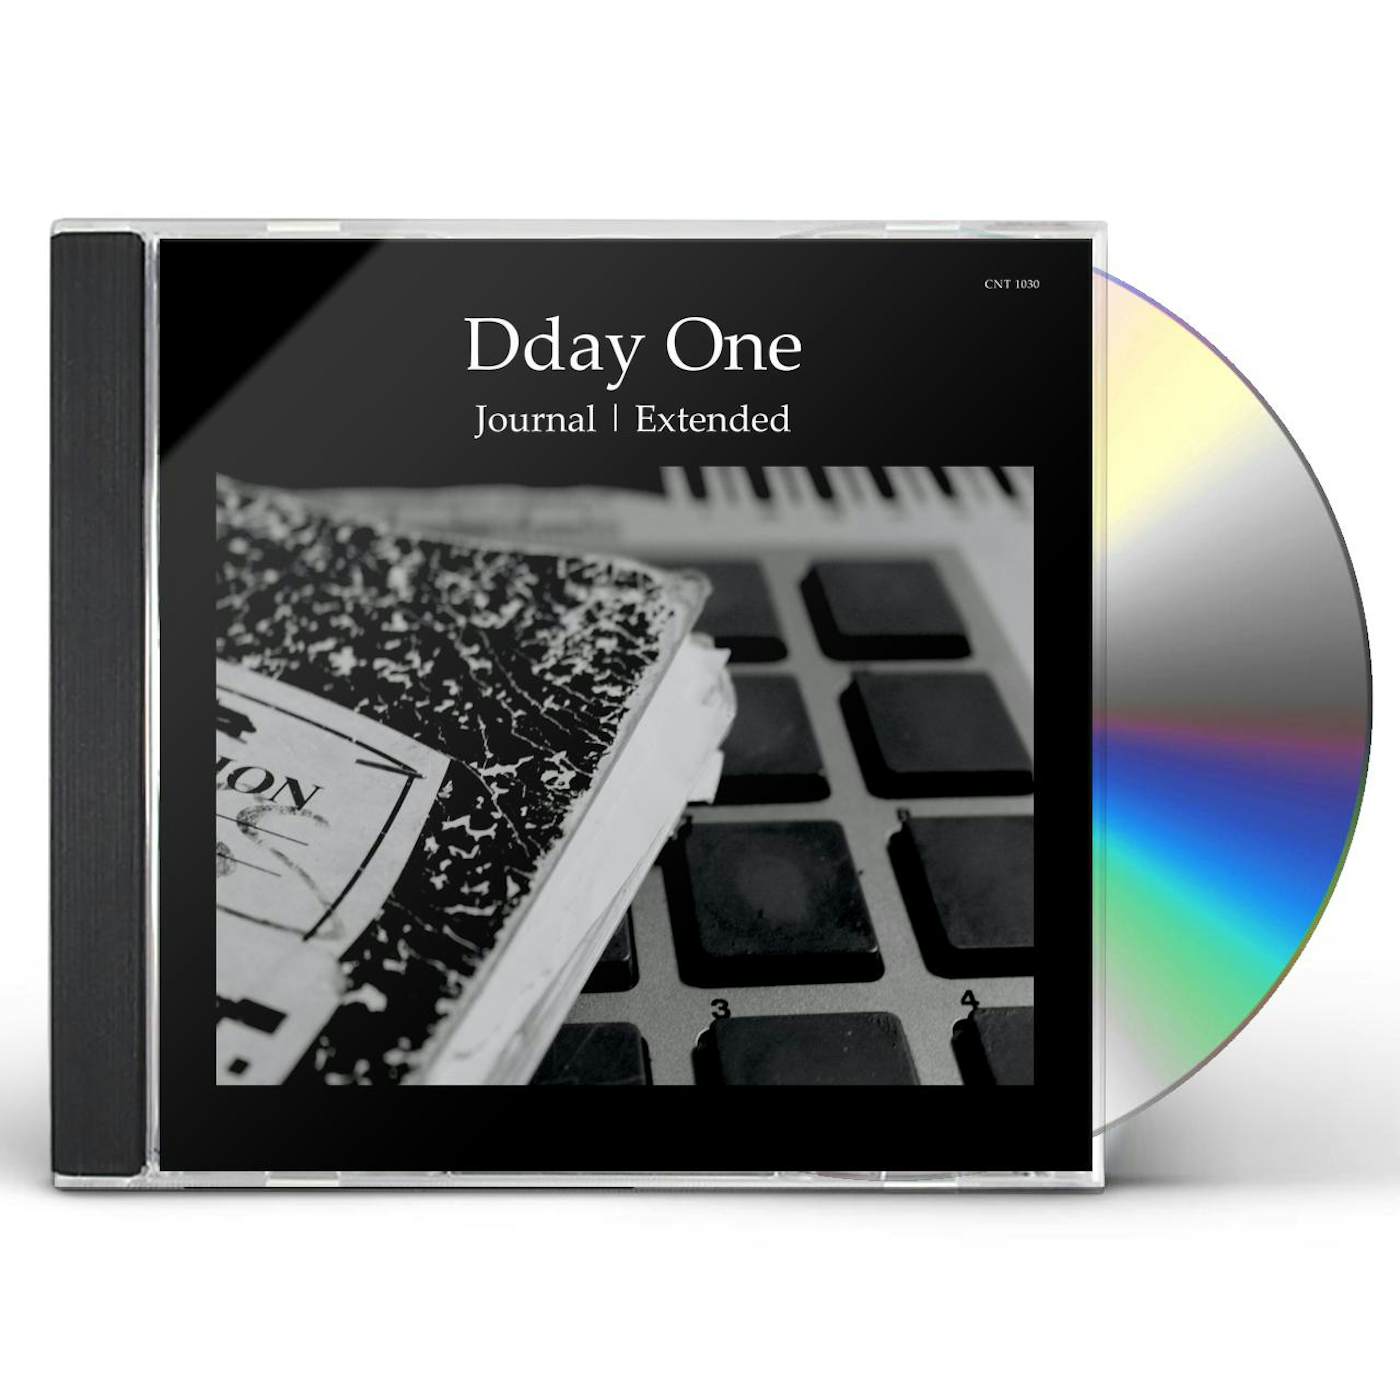 Dday One JOURNAL EXTENDED CD